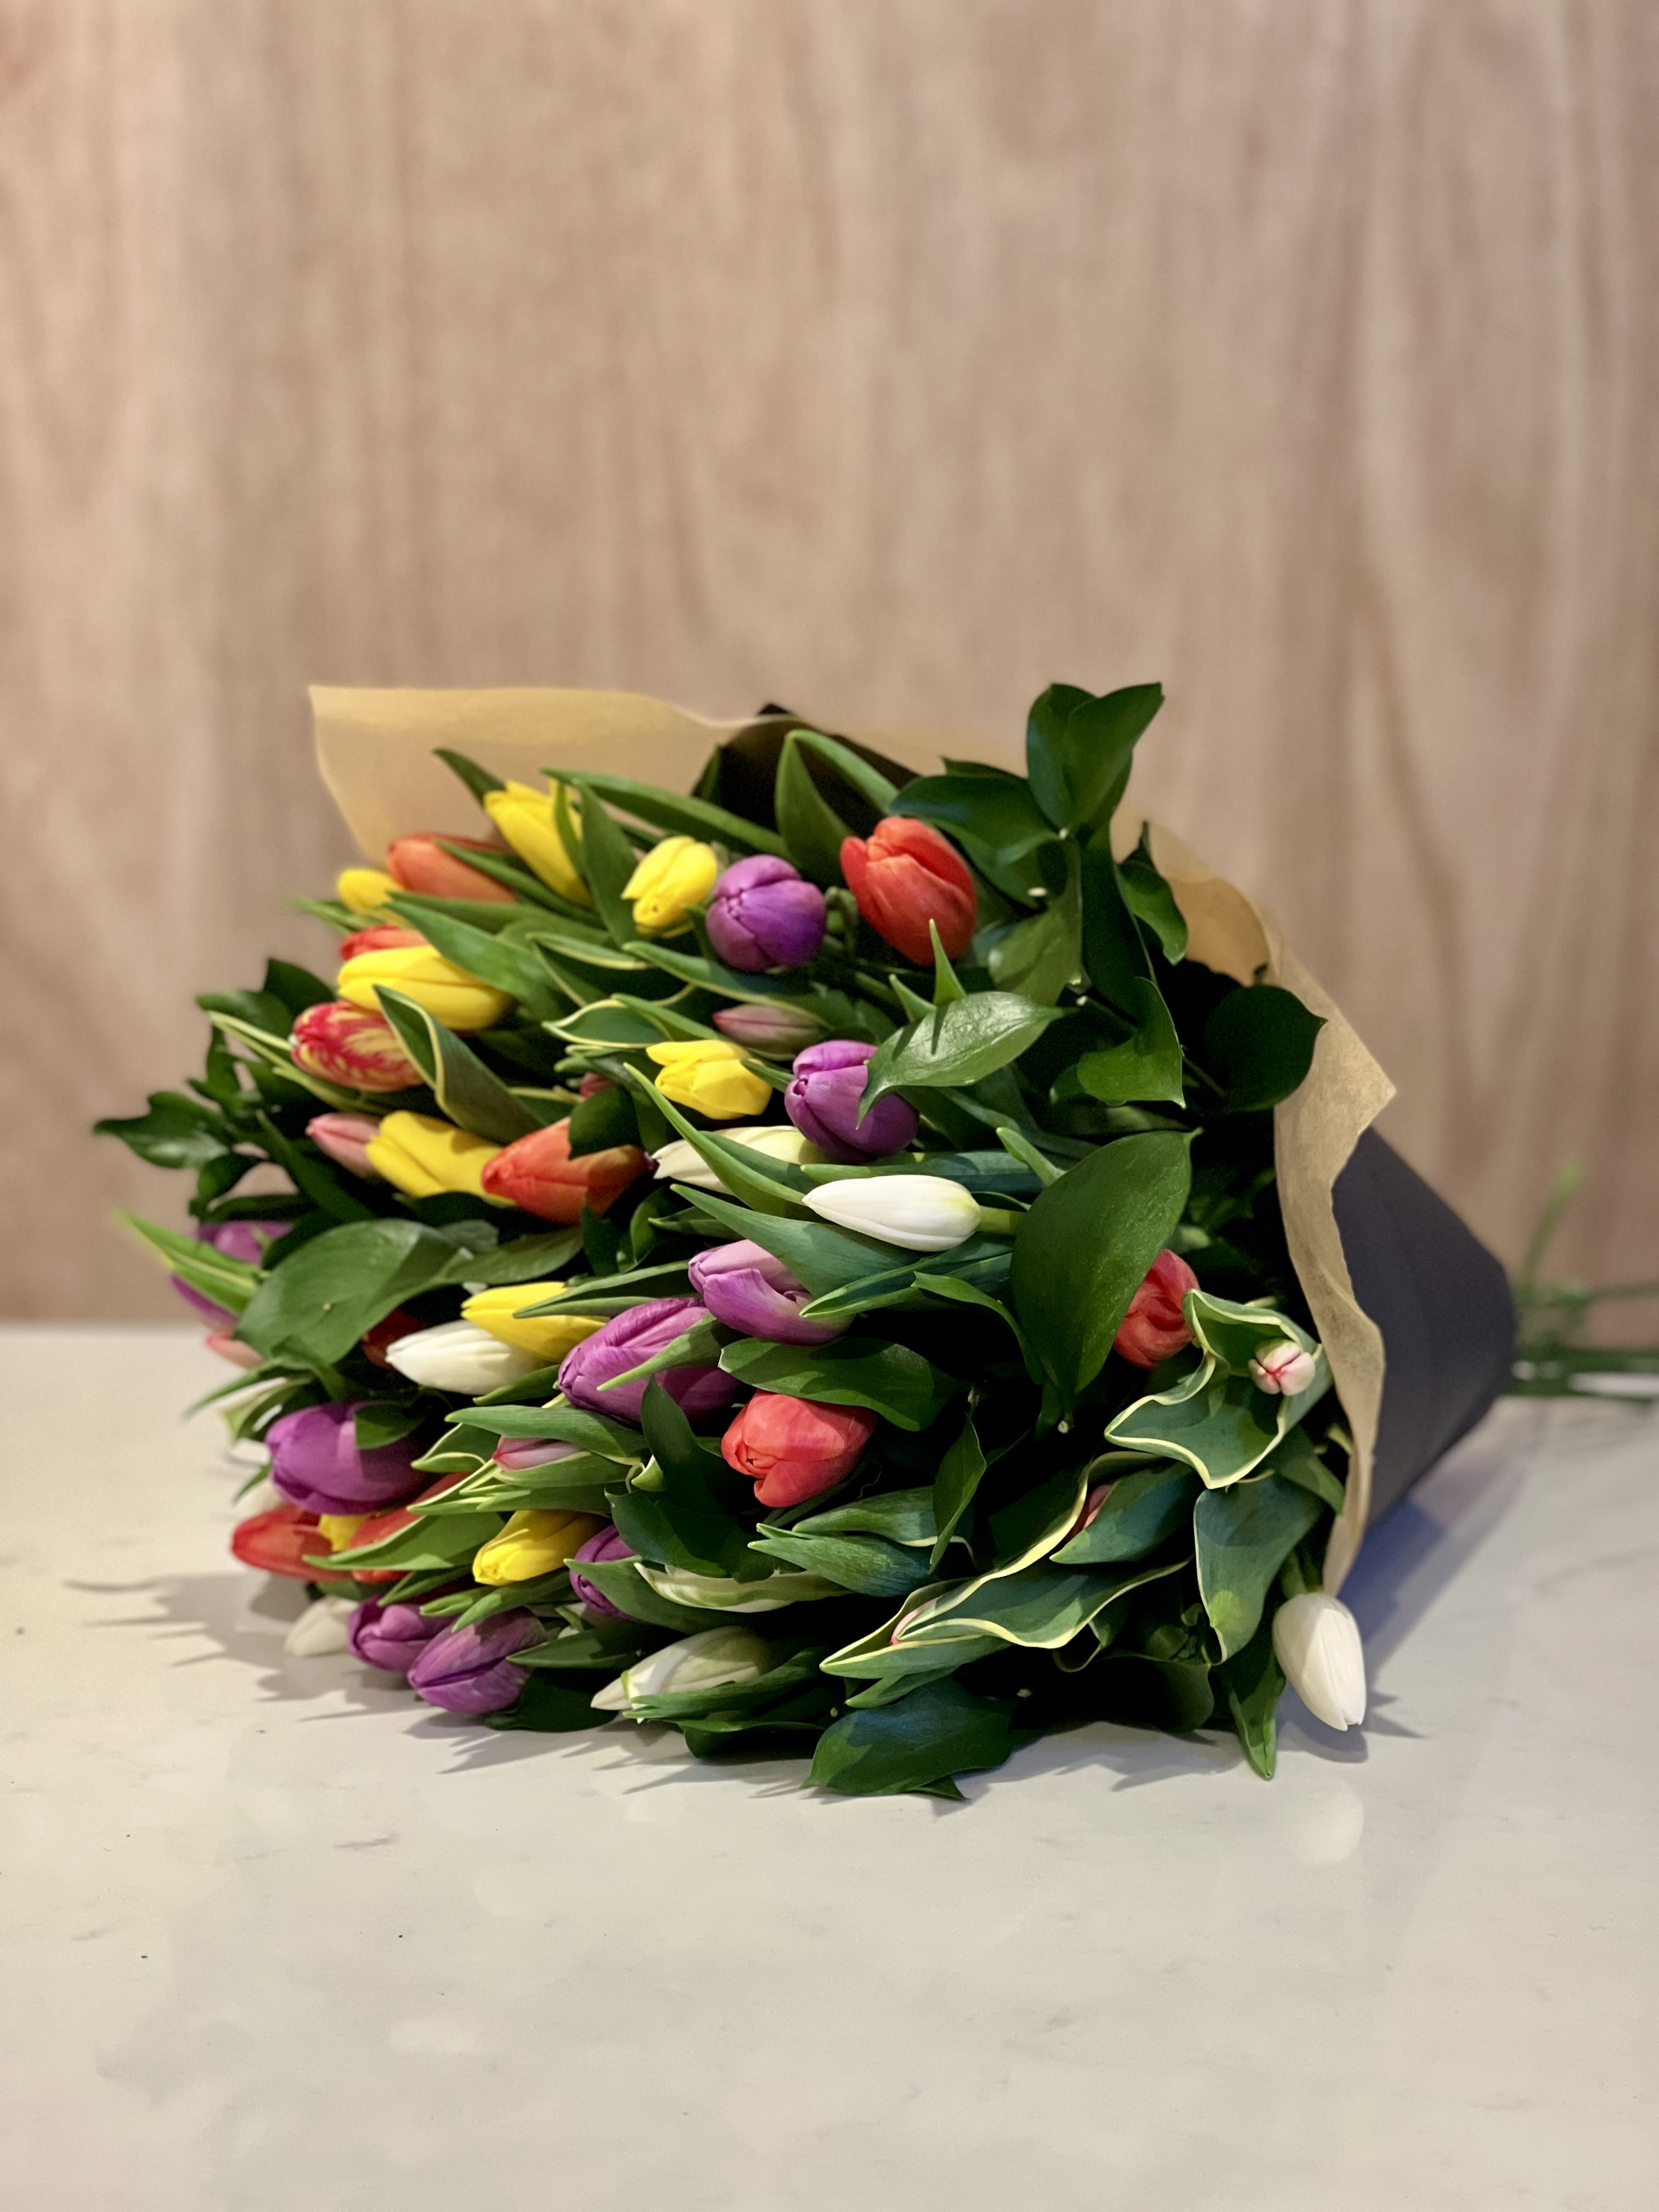 TULIP BOUQUET - Radiating vibrant charm, this beautiful bouquet spotlights a collection of tulips thoughtfully gathered in a delightful array of sizes and hues. Hand-wrapped and finished with ribbon, this bouquet emanates a lively and spirited aesthetic.